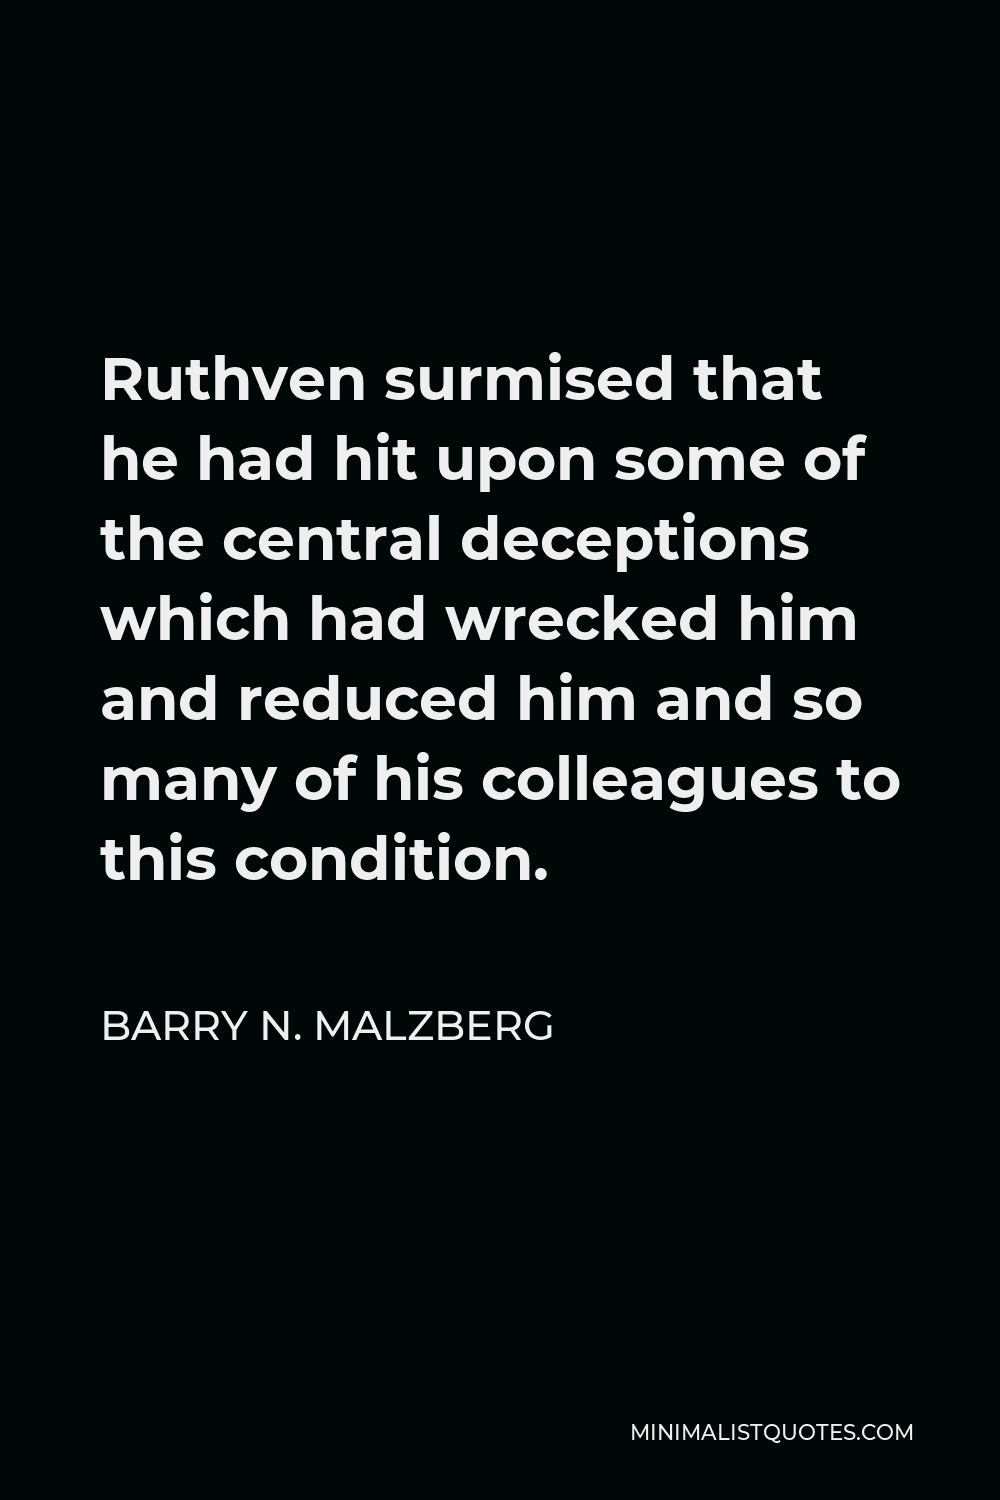 Barry N. Malzberg Quote - Ruthven surmised that he had hit upon some of the central deceptions which had wrecked him and reduced him and so many of his colleagues to this condition.